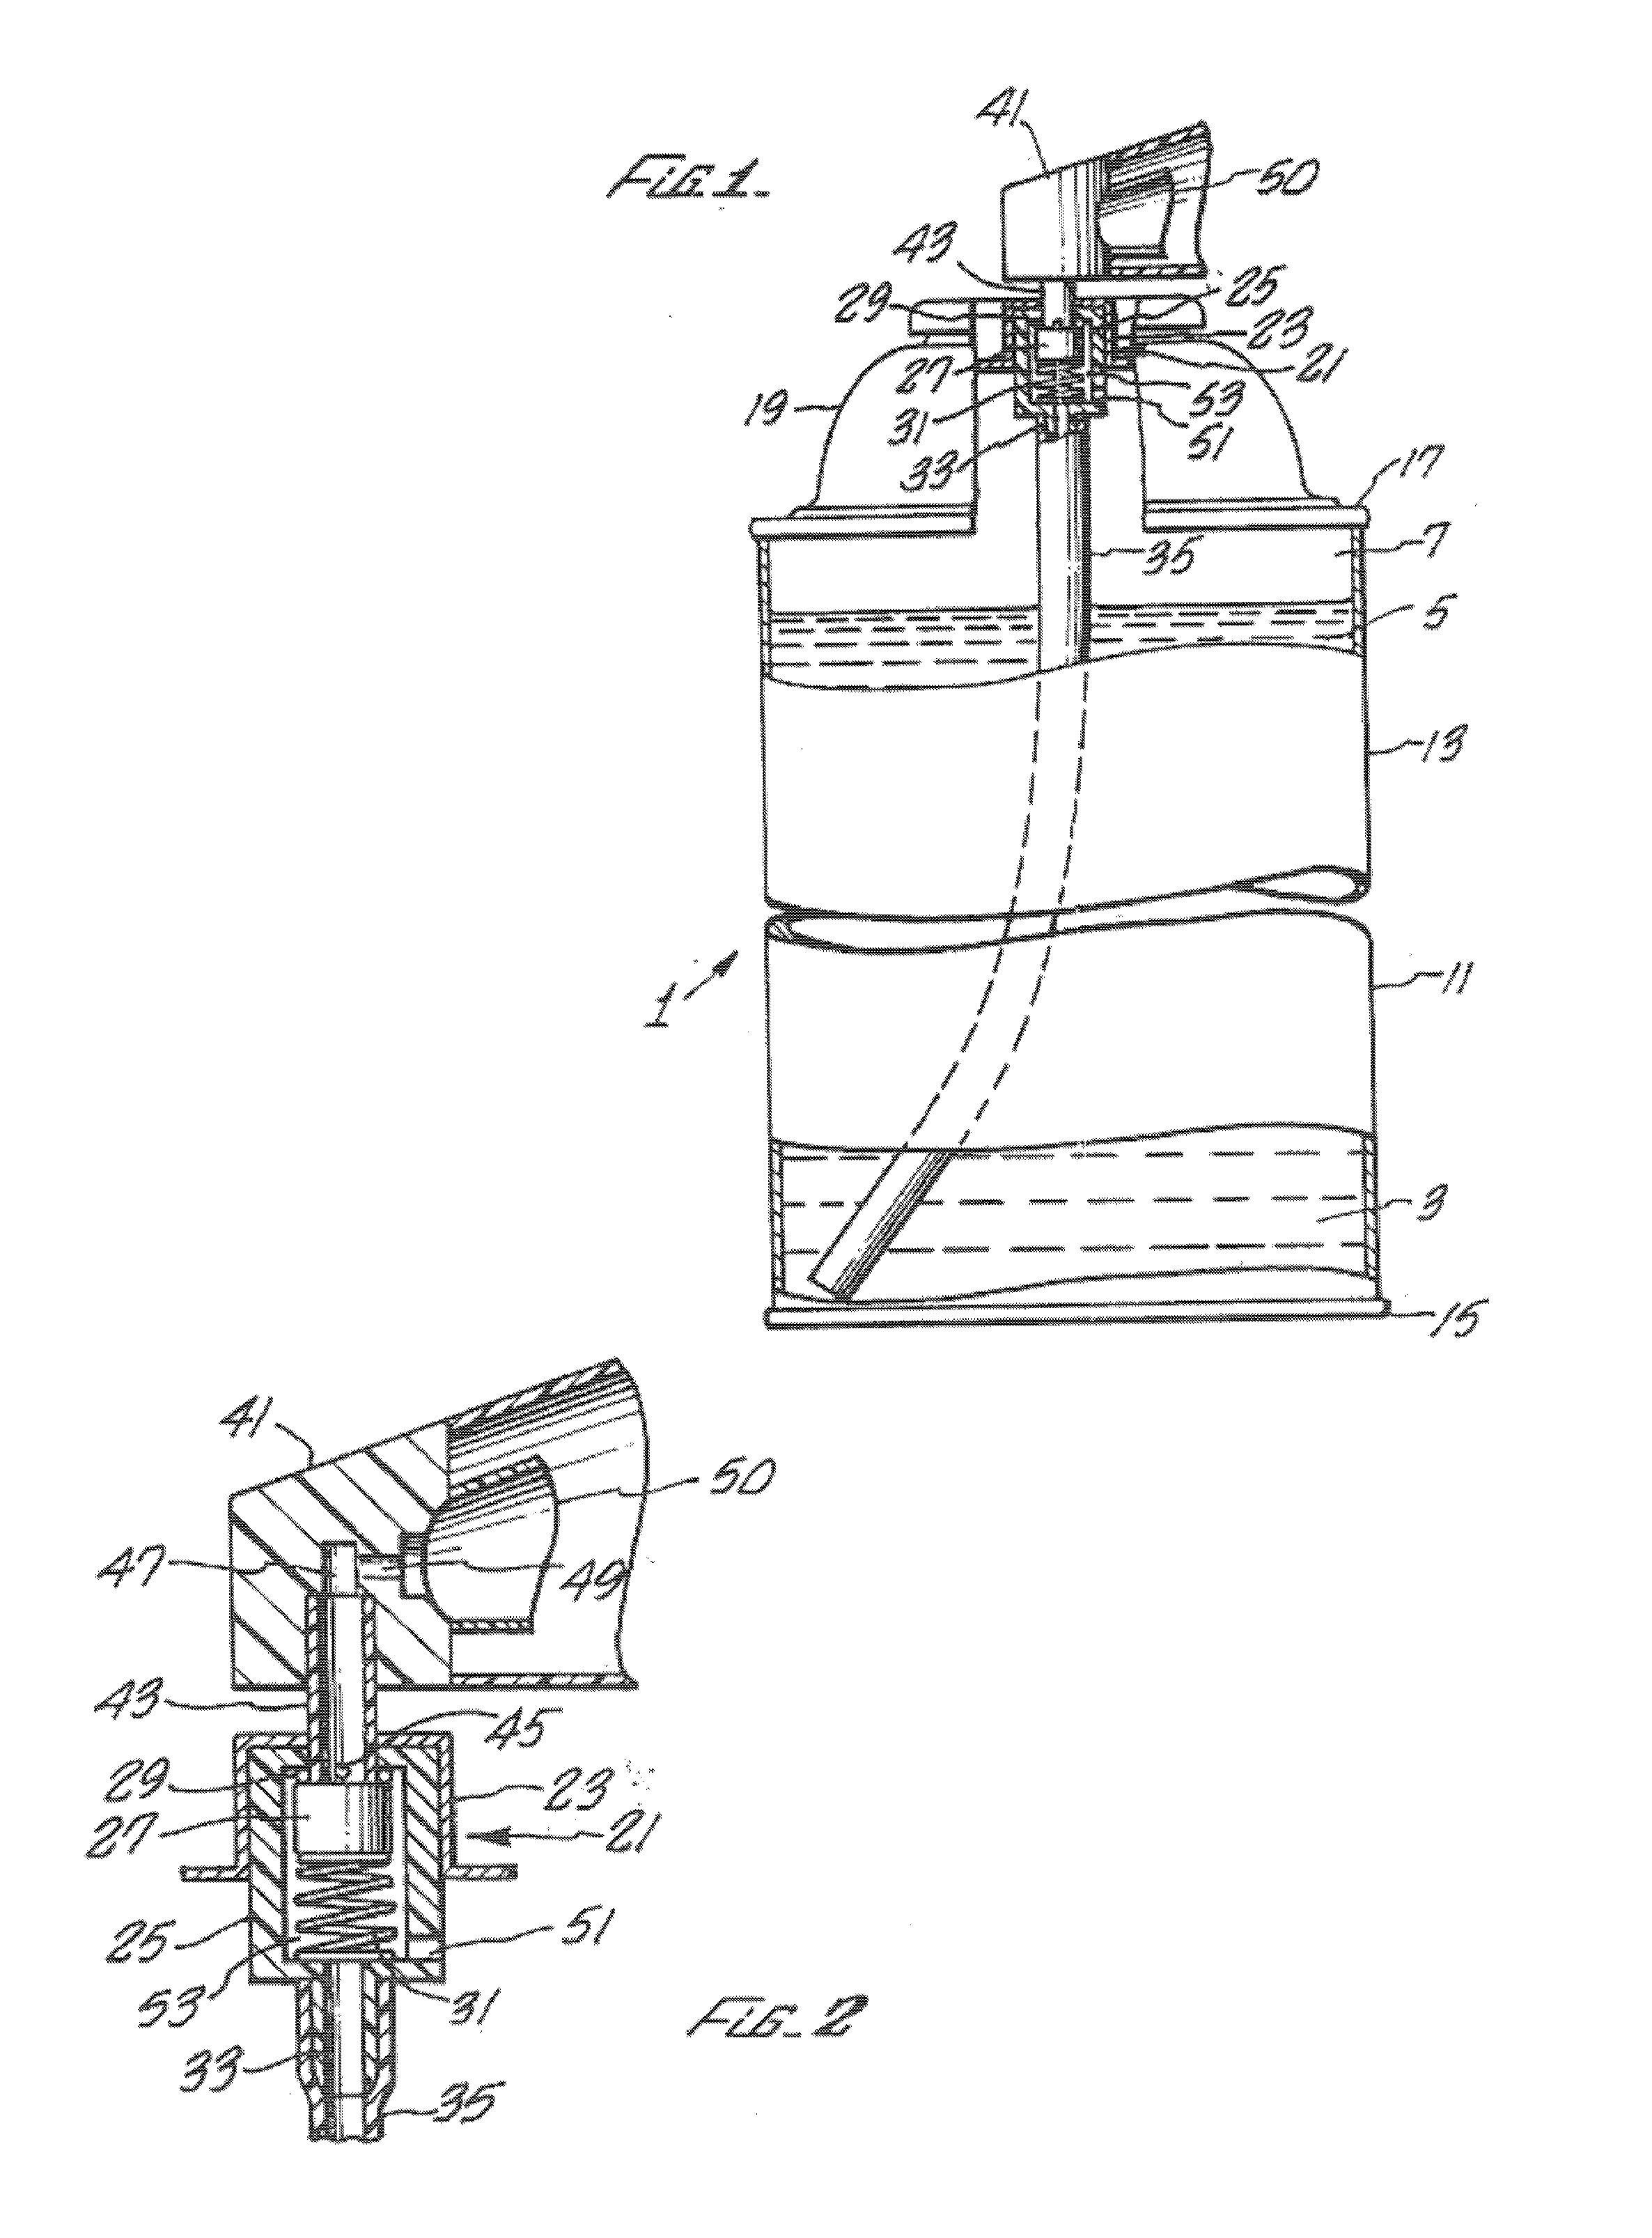 Apparatus for dispensing a bird haze product from a can